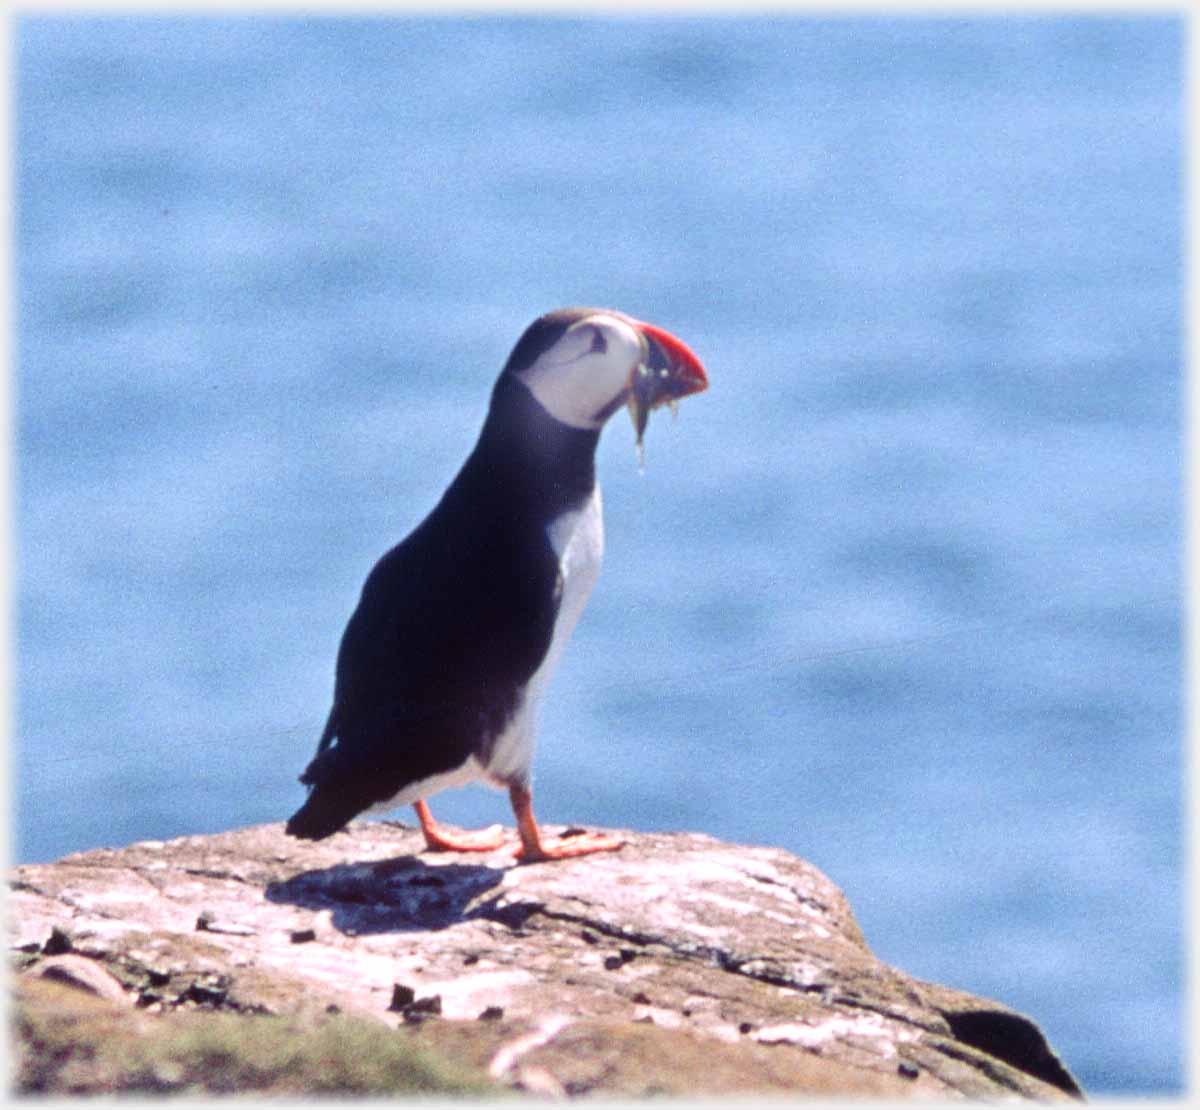 Puffin with small sand-eels in its beak.